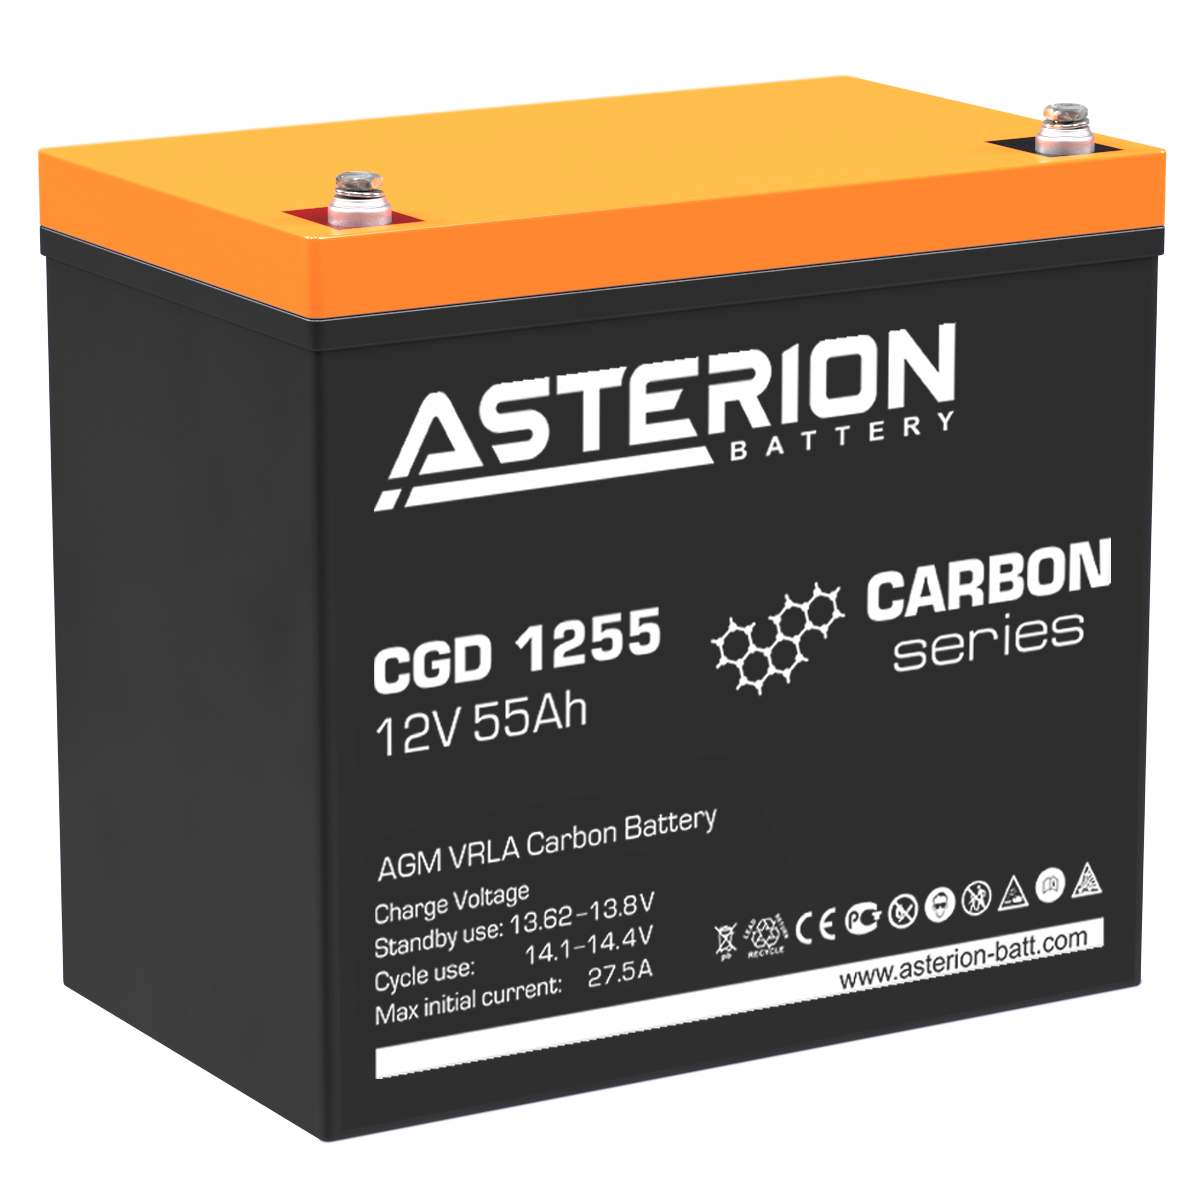 Asterion CGD 1255 12V/55AH AGM Deep Cycle Battery